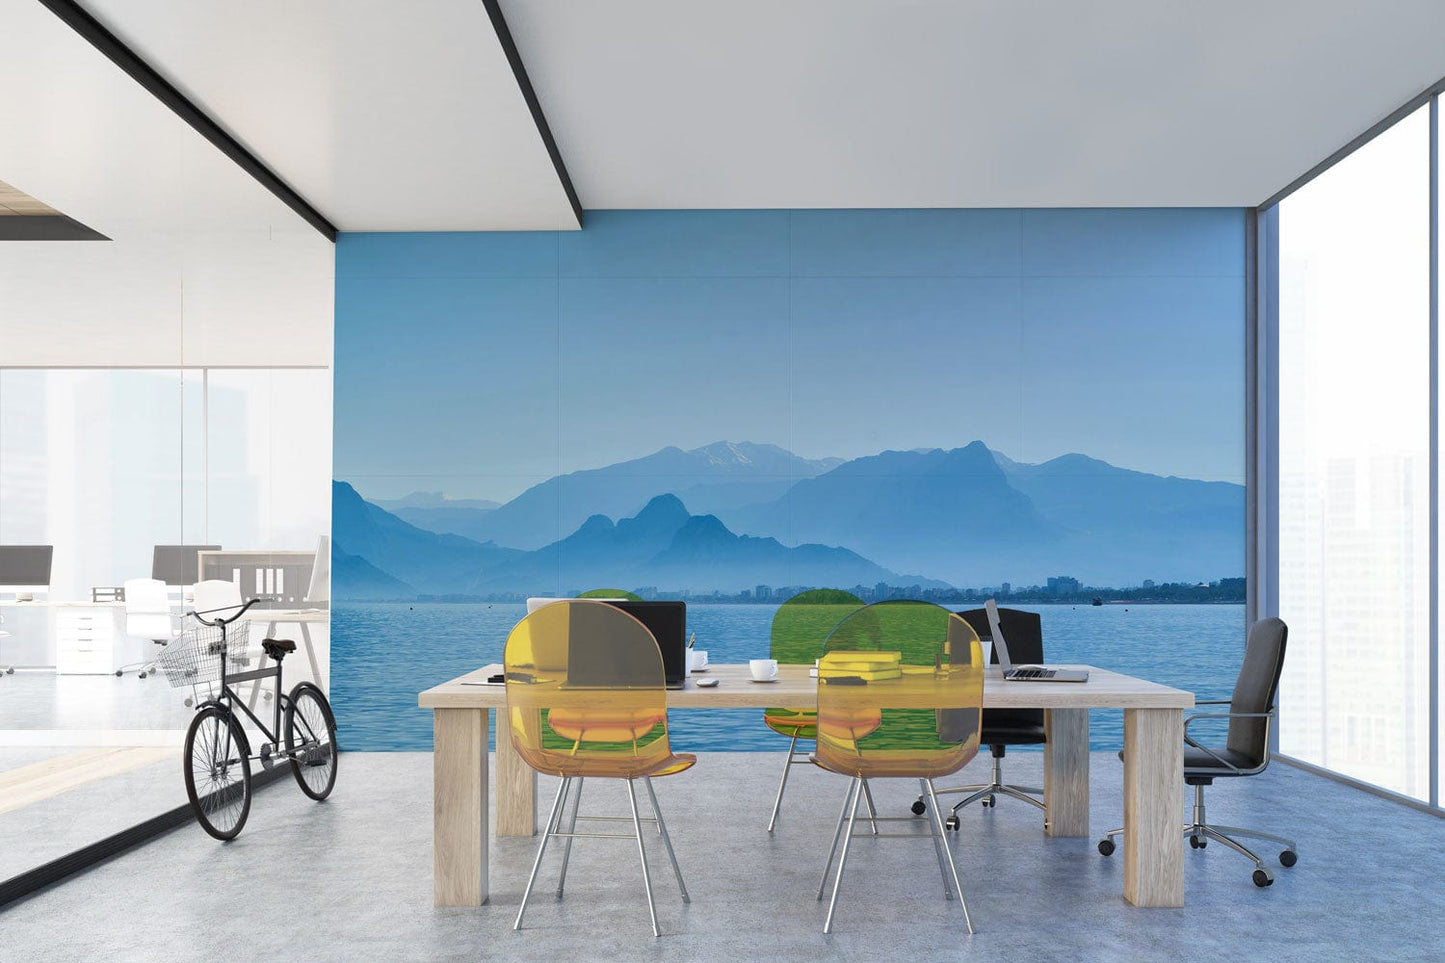 Wallpaper Mural for Meeting Room Decoration Featuring a Blue Lake and Mountains Scenery